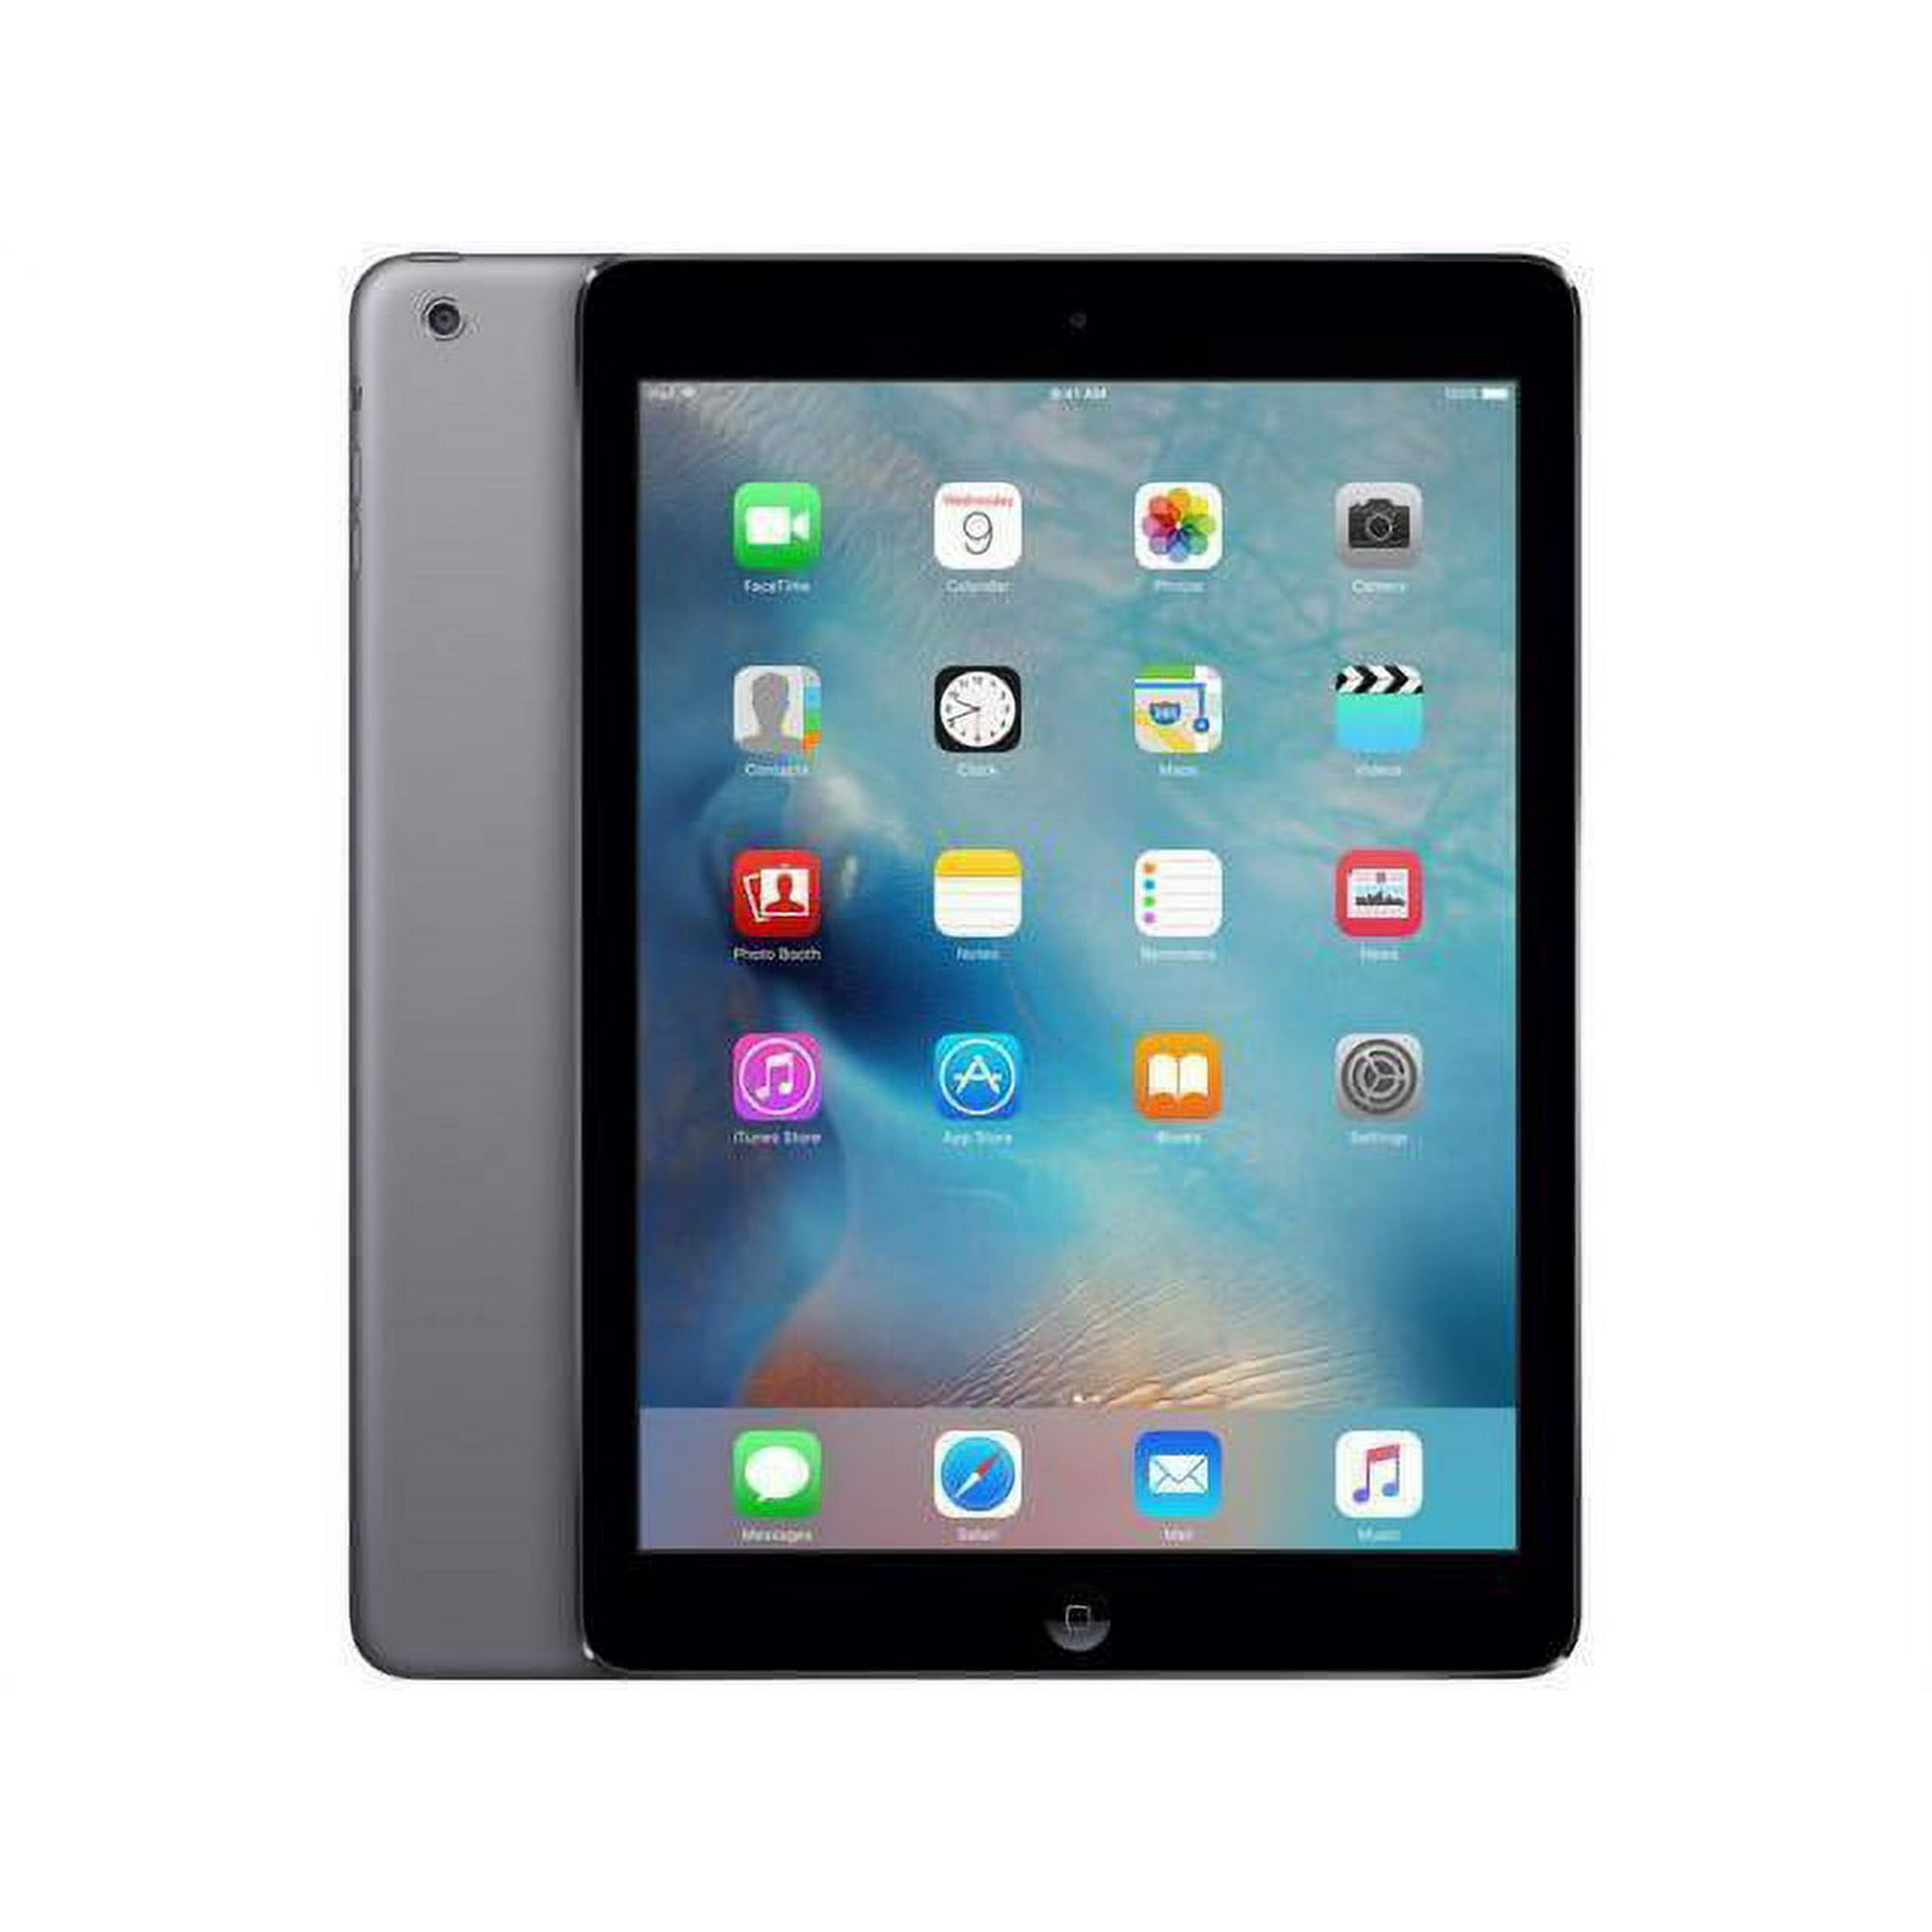 Restored Apple iPad Air A1475 (WiFi + Cellular Unlocked) 16GB Space Gray  Bundle w/ Case, Bluetooth Headset, Tempered Glass, Stylus, Charger